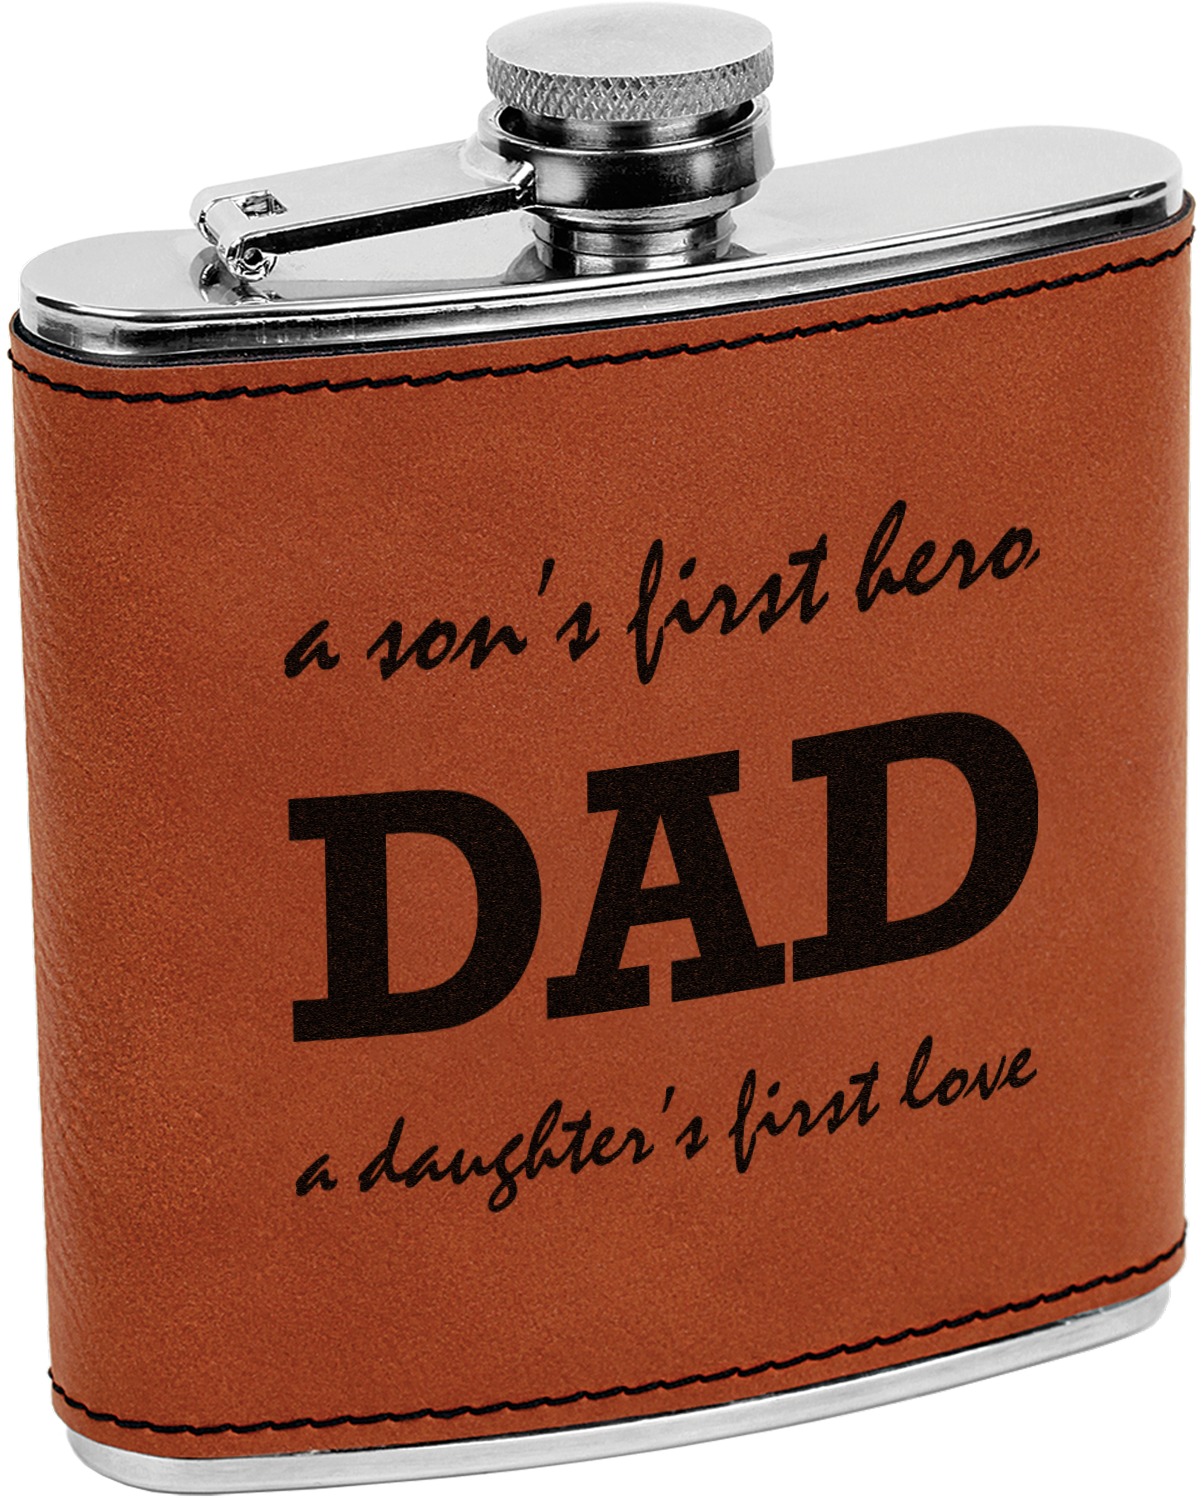 Way To Celebrate Father's Day Stainless Steel Faux Leather Wrap Tumbler,  World's Best Dad 